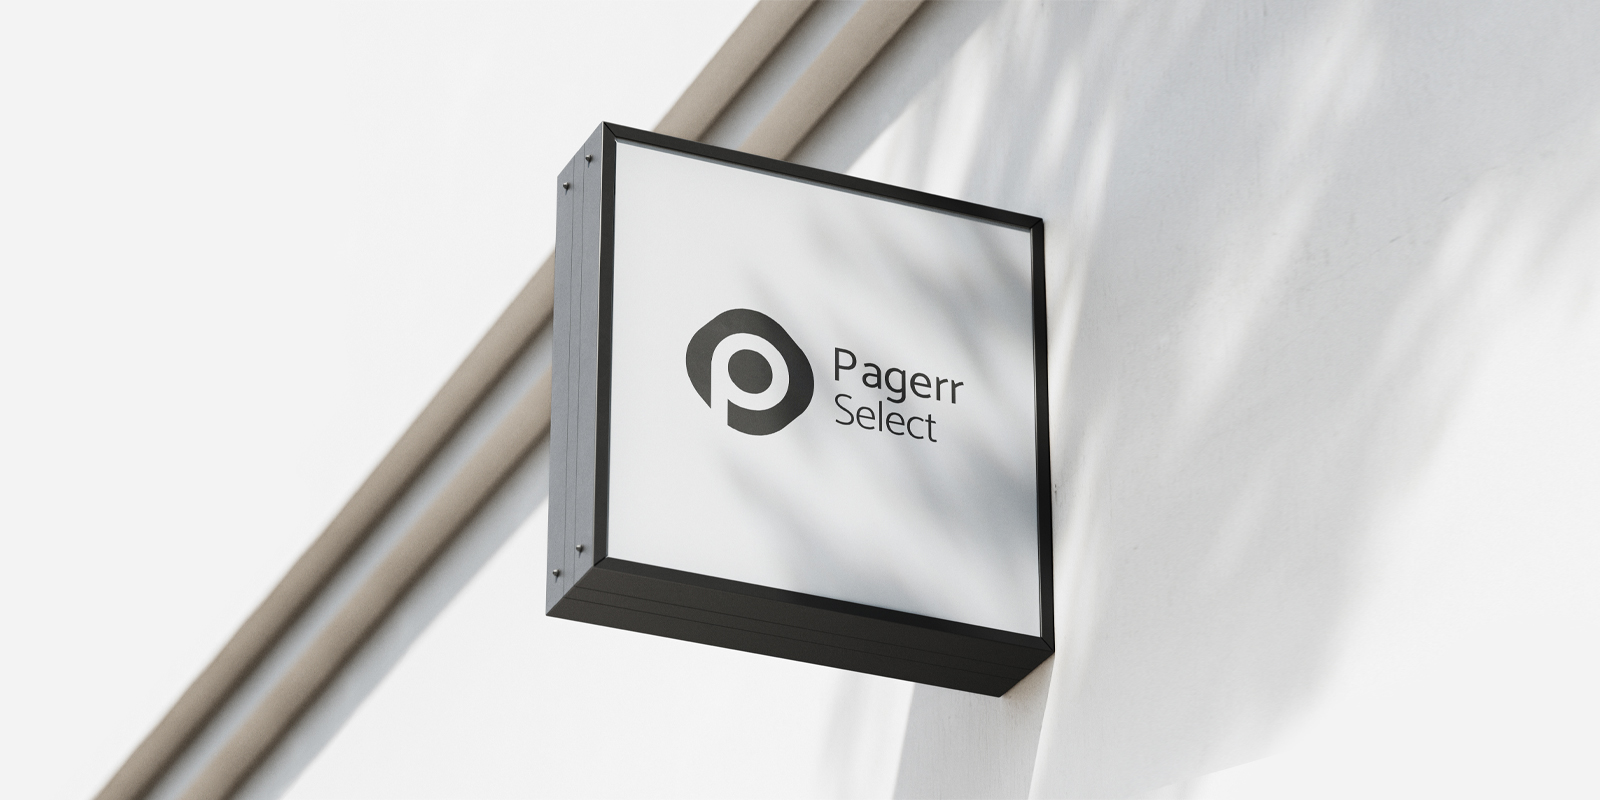 Essential signs in Hobart - Print with Pagerr